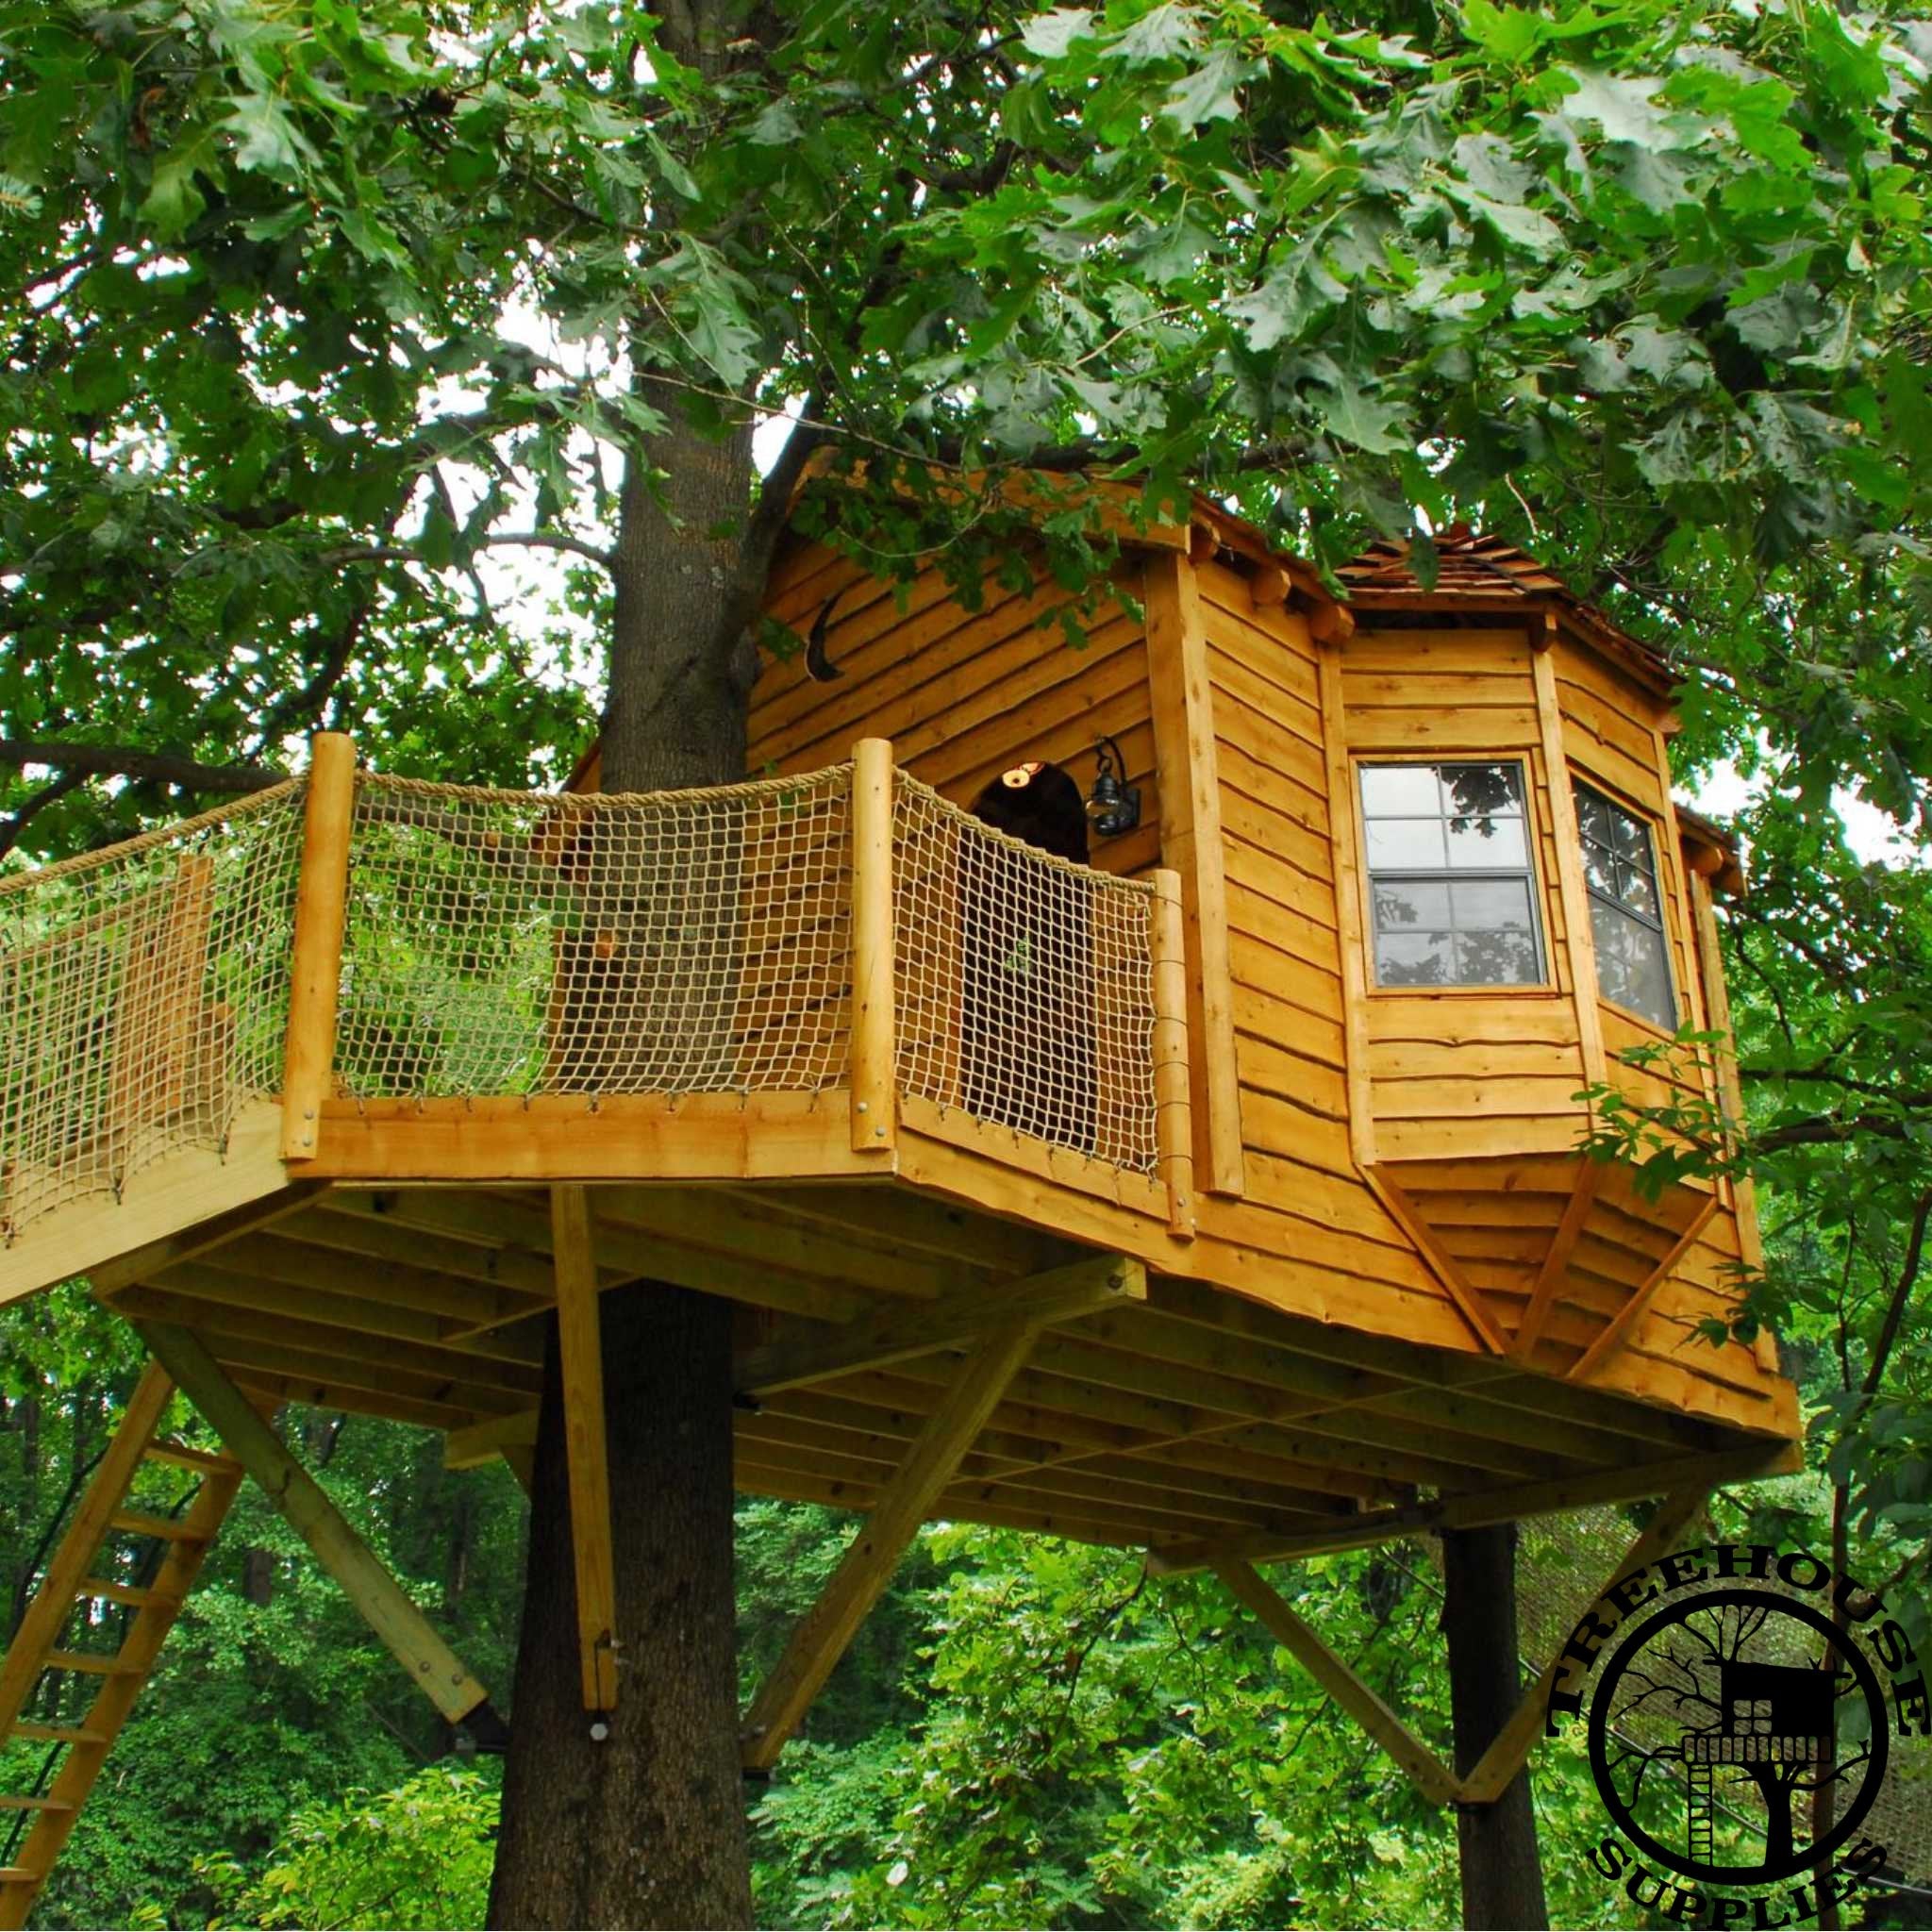 The Tahoe : Rectangular Treehouse Plan, Size: One Size